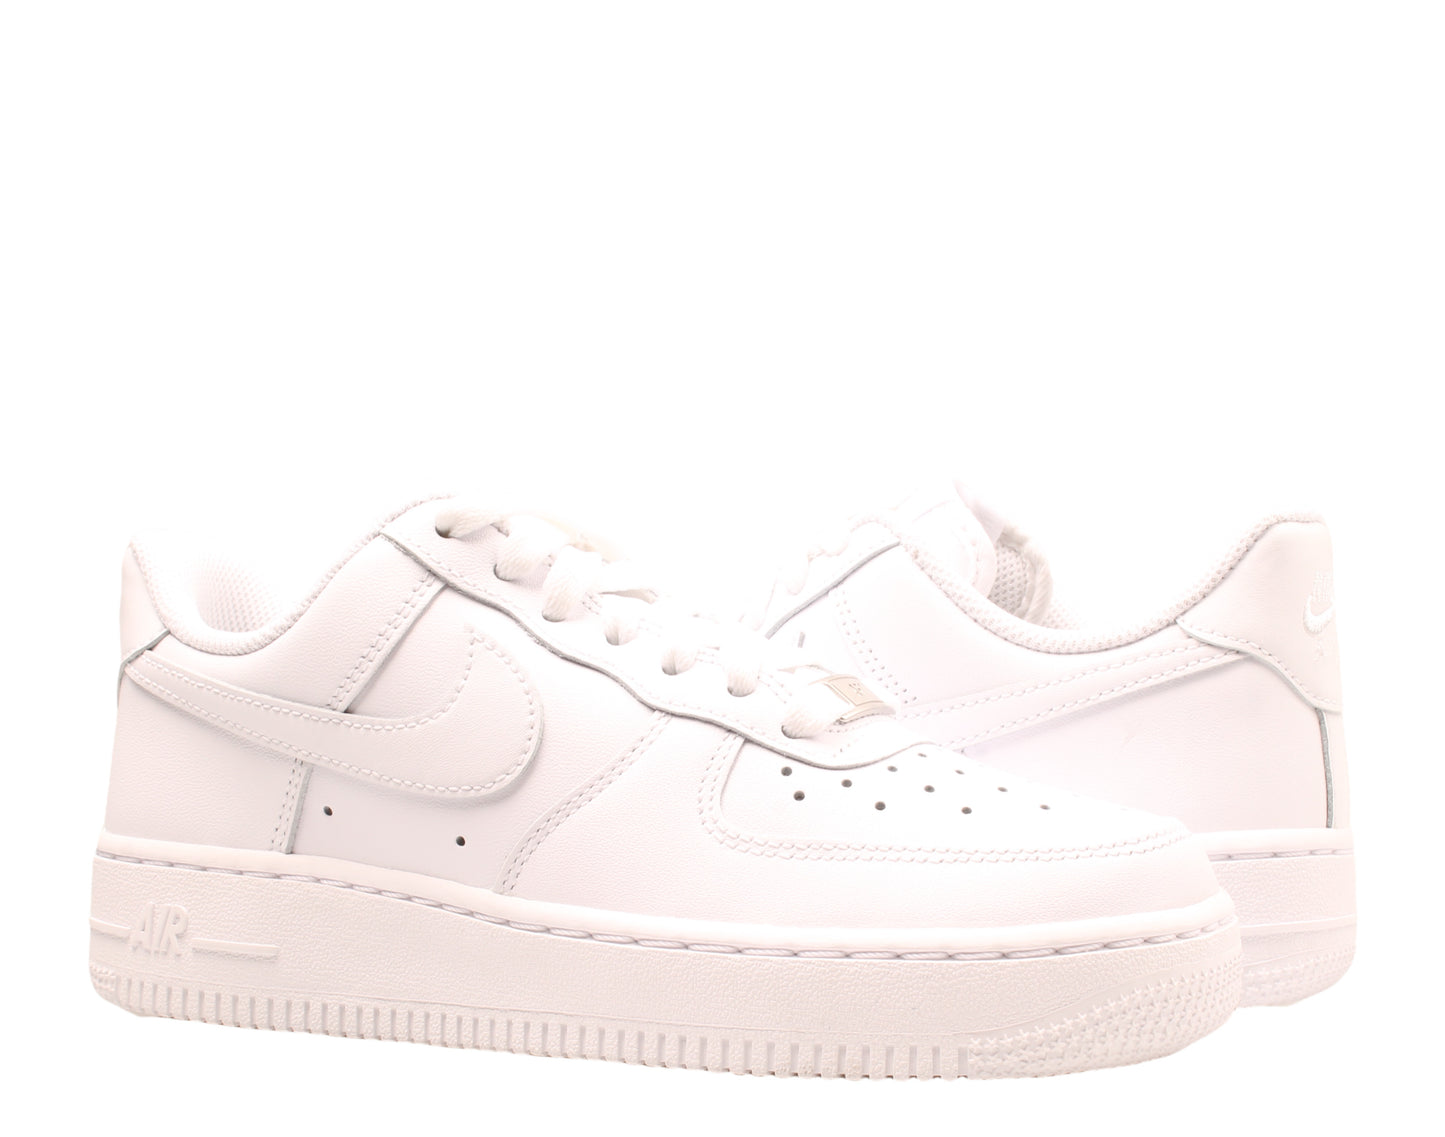 Nike Air Force 1 07 Women's Basketball Shoes